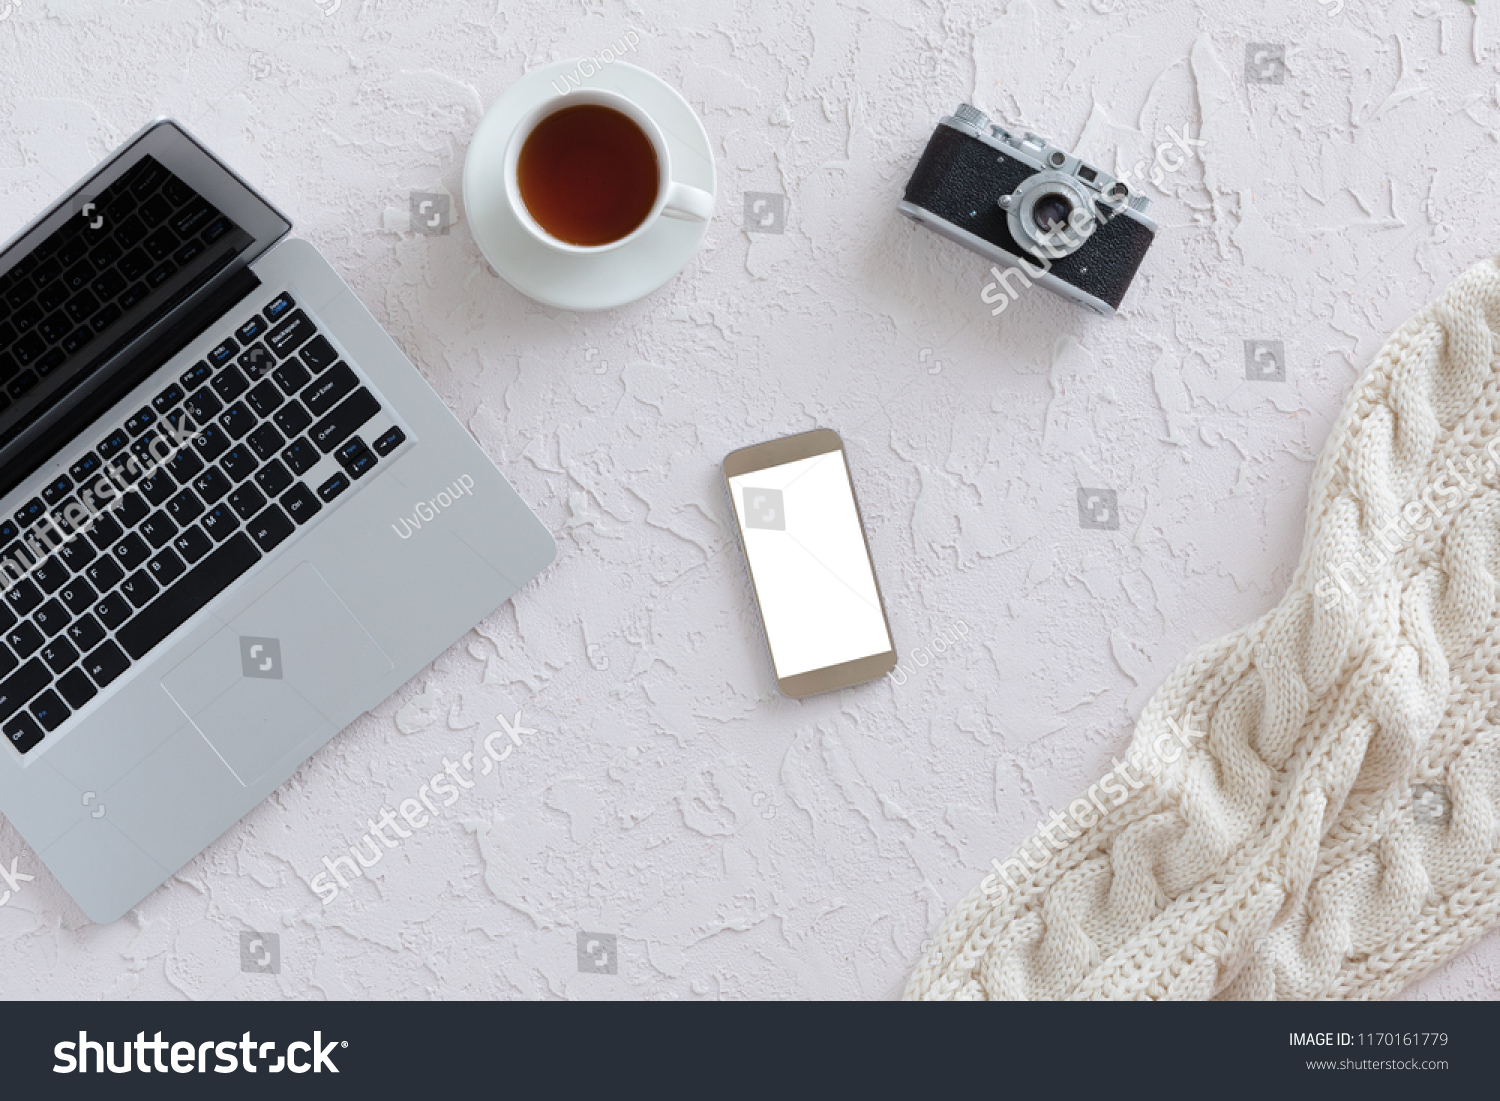 Top view of white office desk with laptop, cup of tea, vintage photo camera and smartphone with isolated screen. Free space for text, business office flat lay concept #1170161779